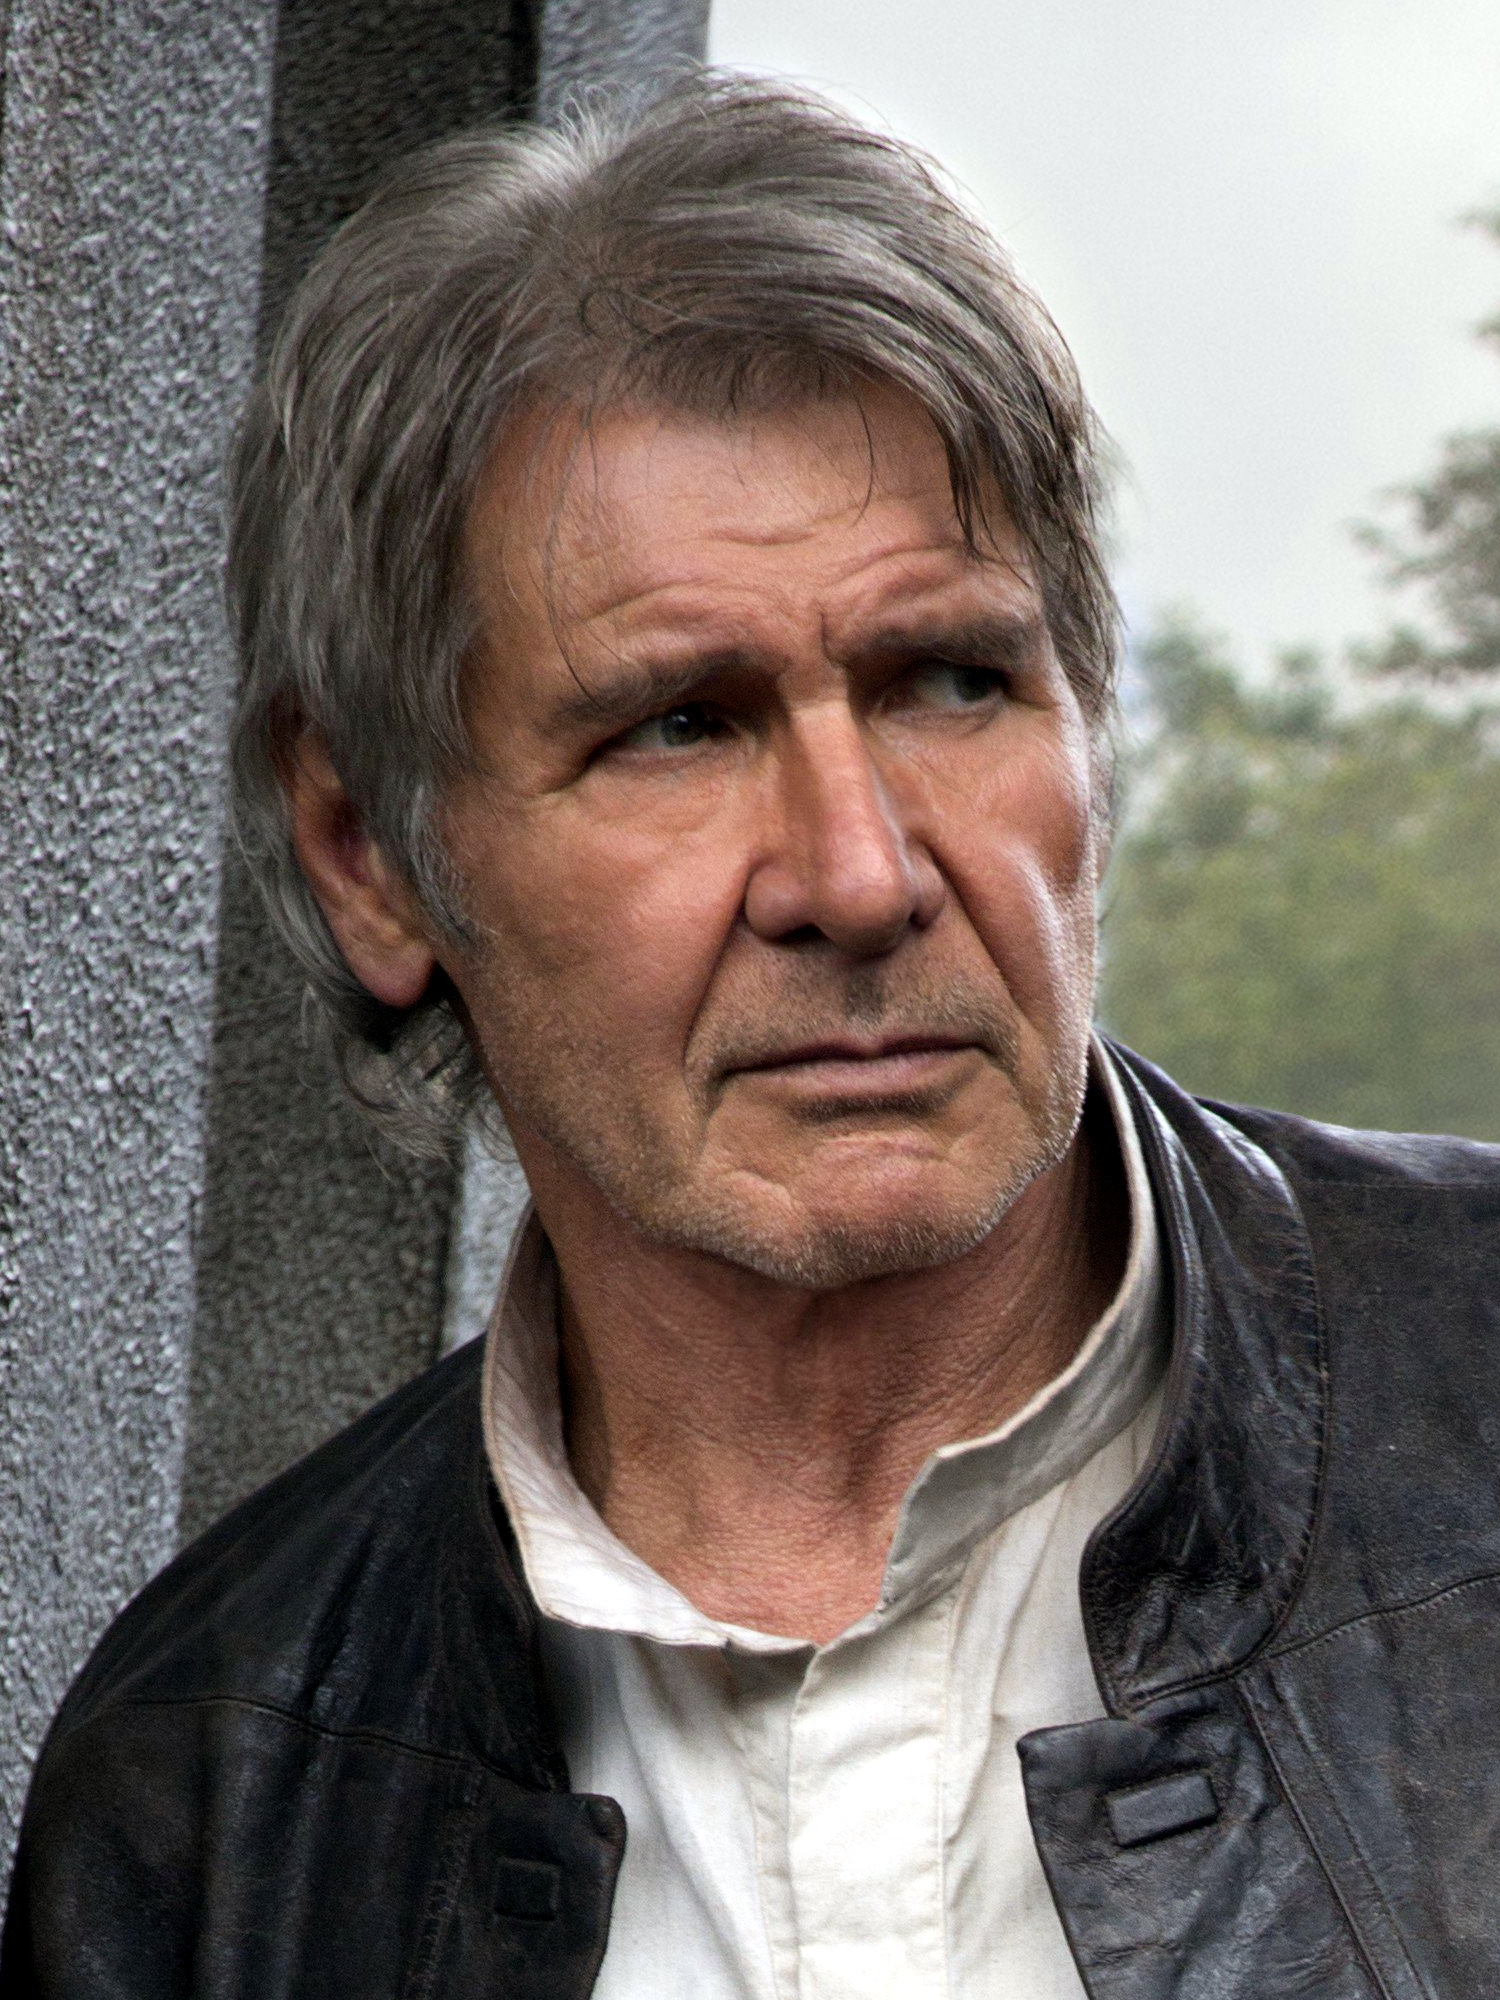 https://static.wikia.nocookie.net/starwars/images/e/e2/TFAHanSolo.png/revision/latest?cb=20160208055002